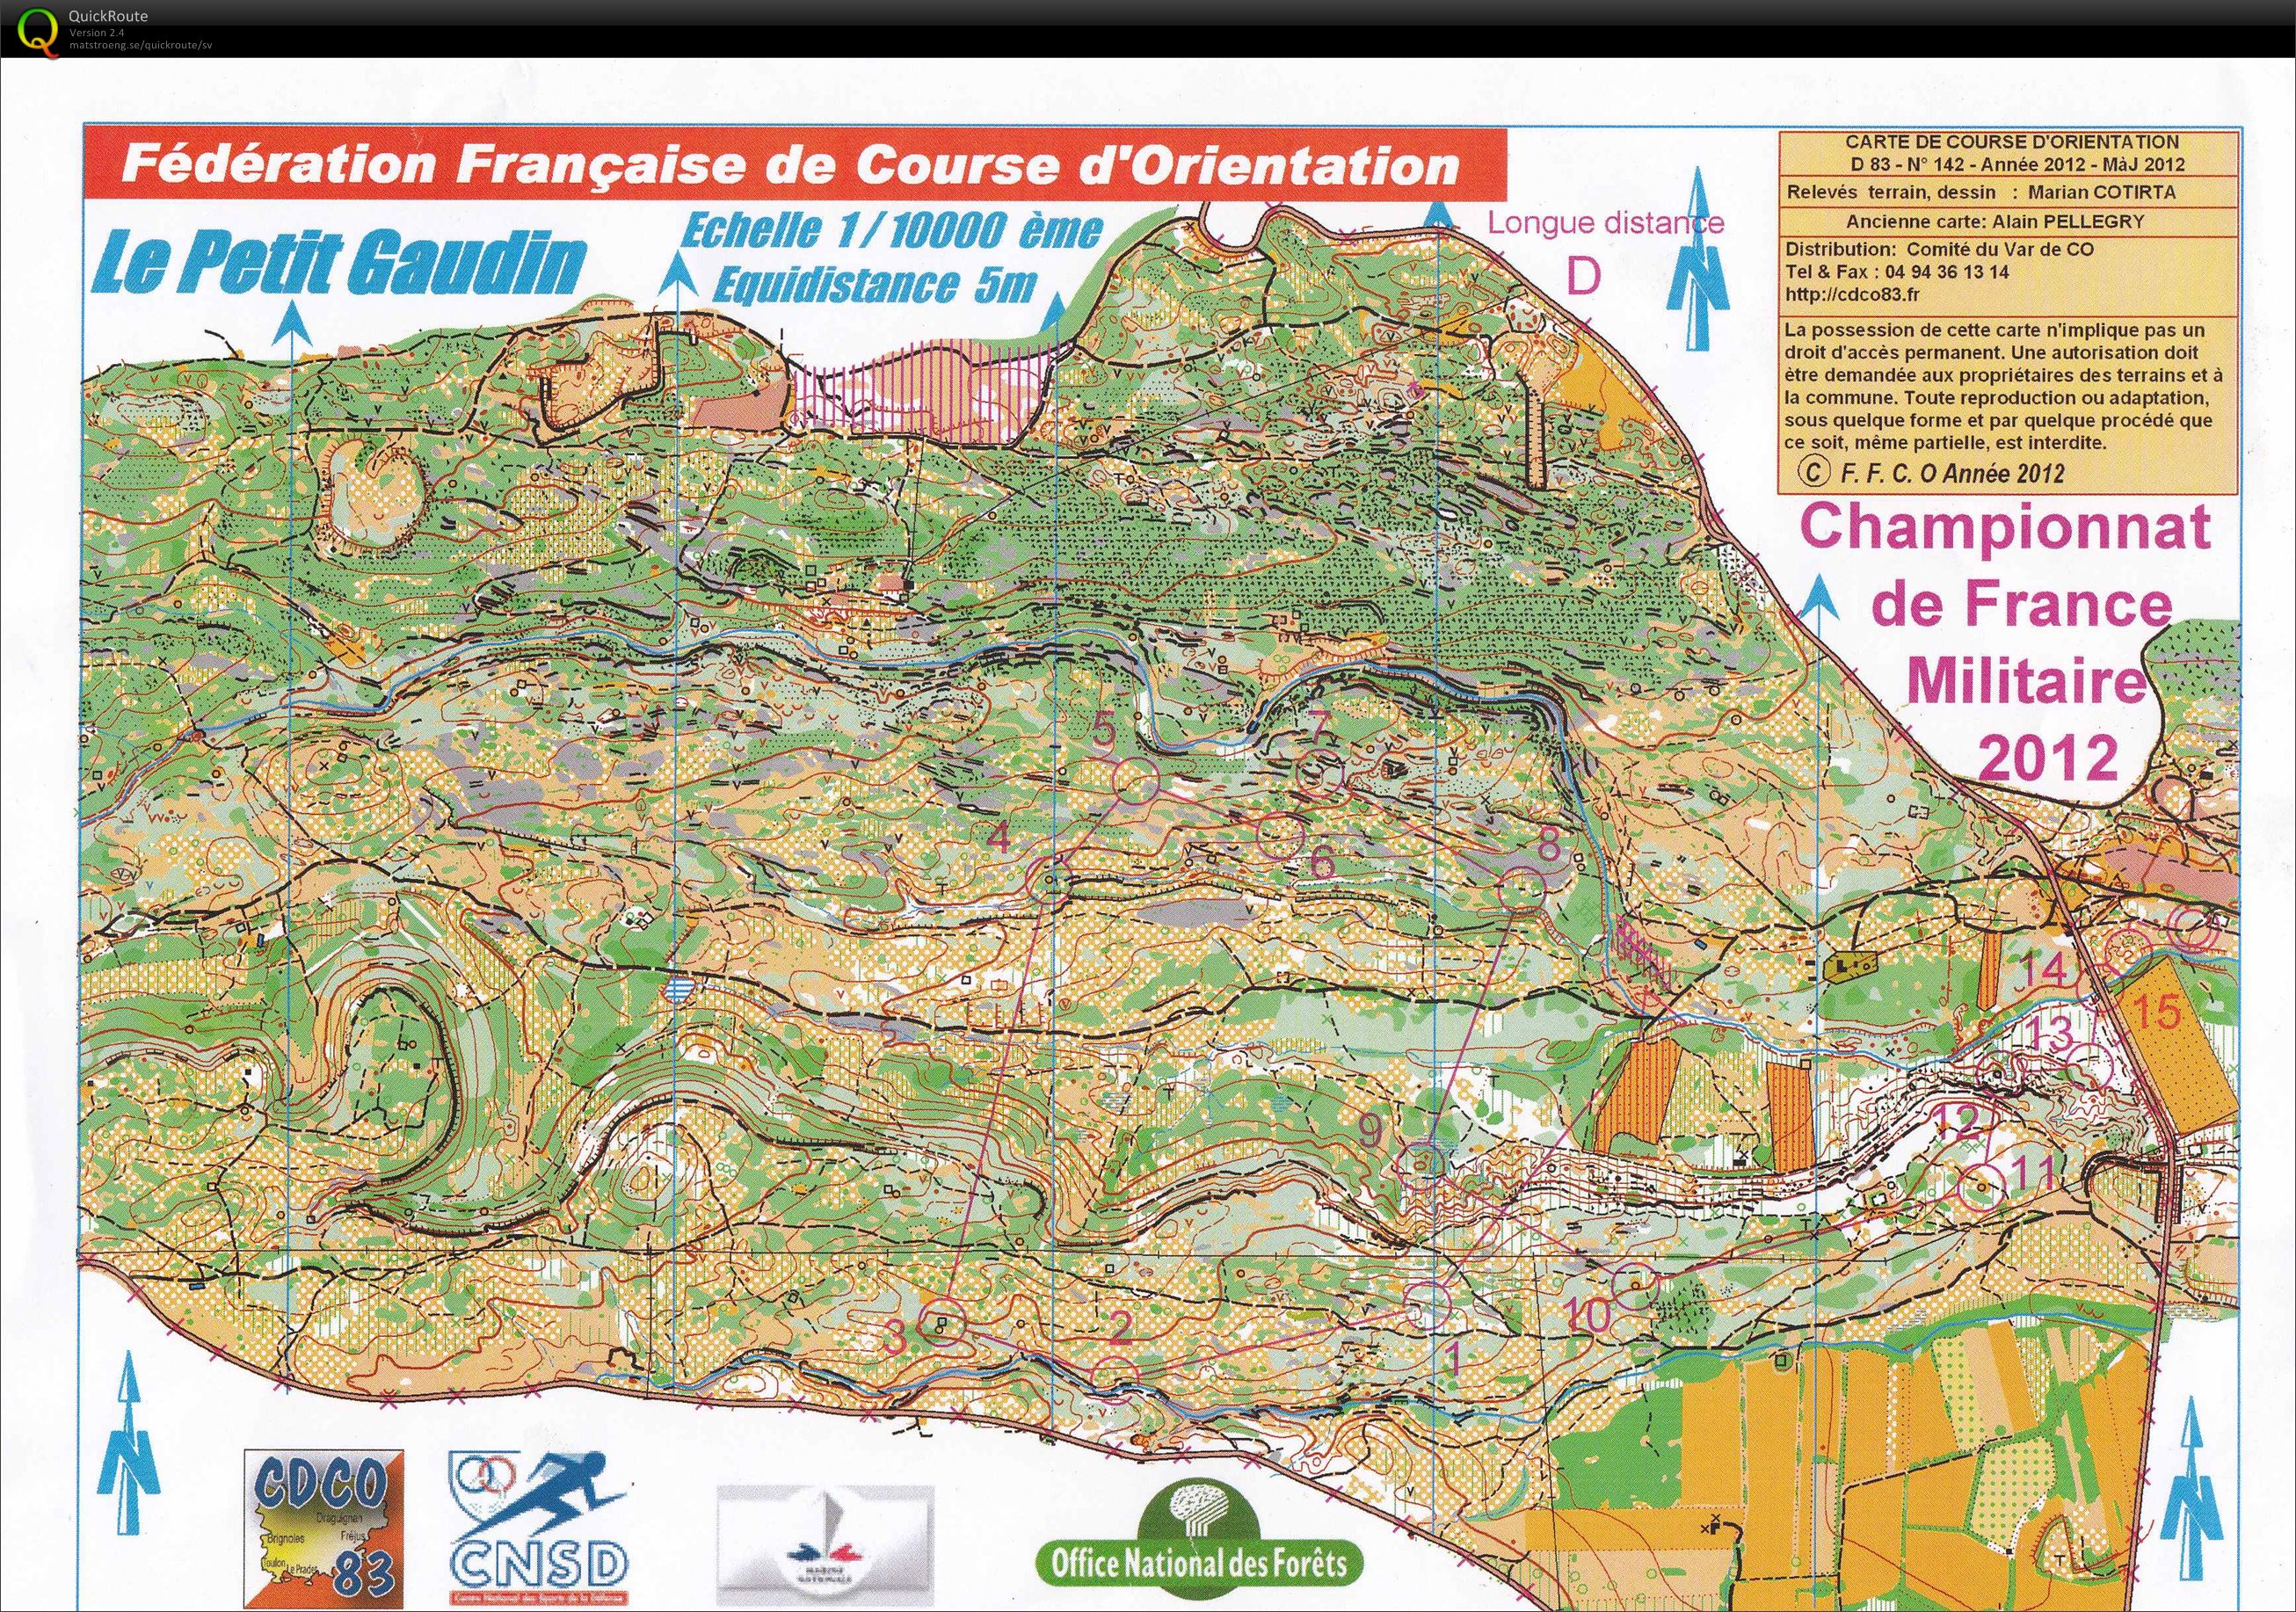 Open race after French Military long dist champ H60 (11.05.2012)